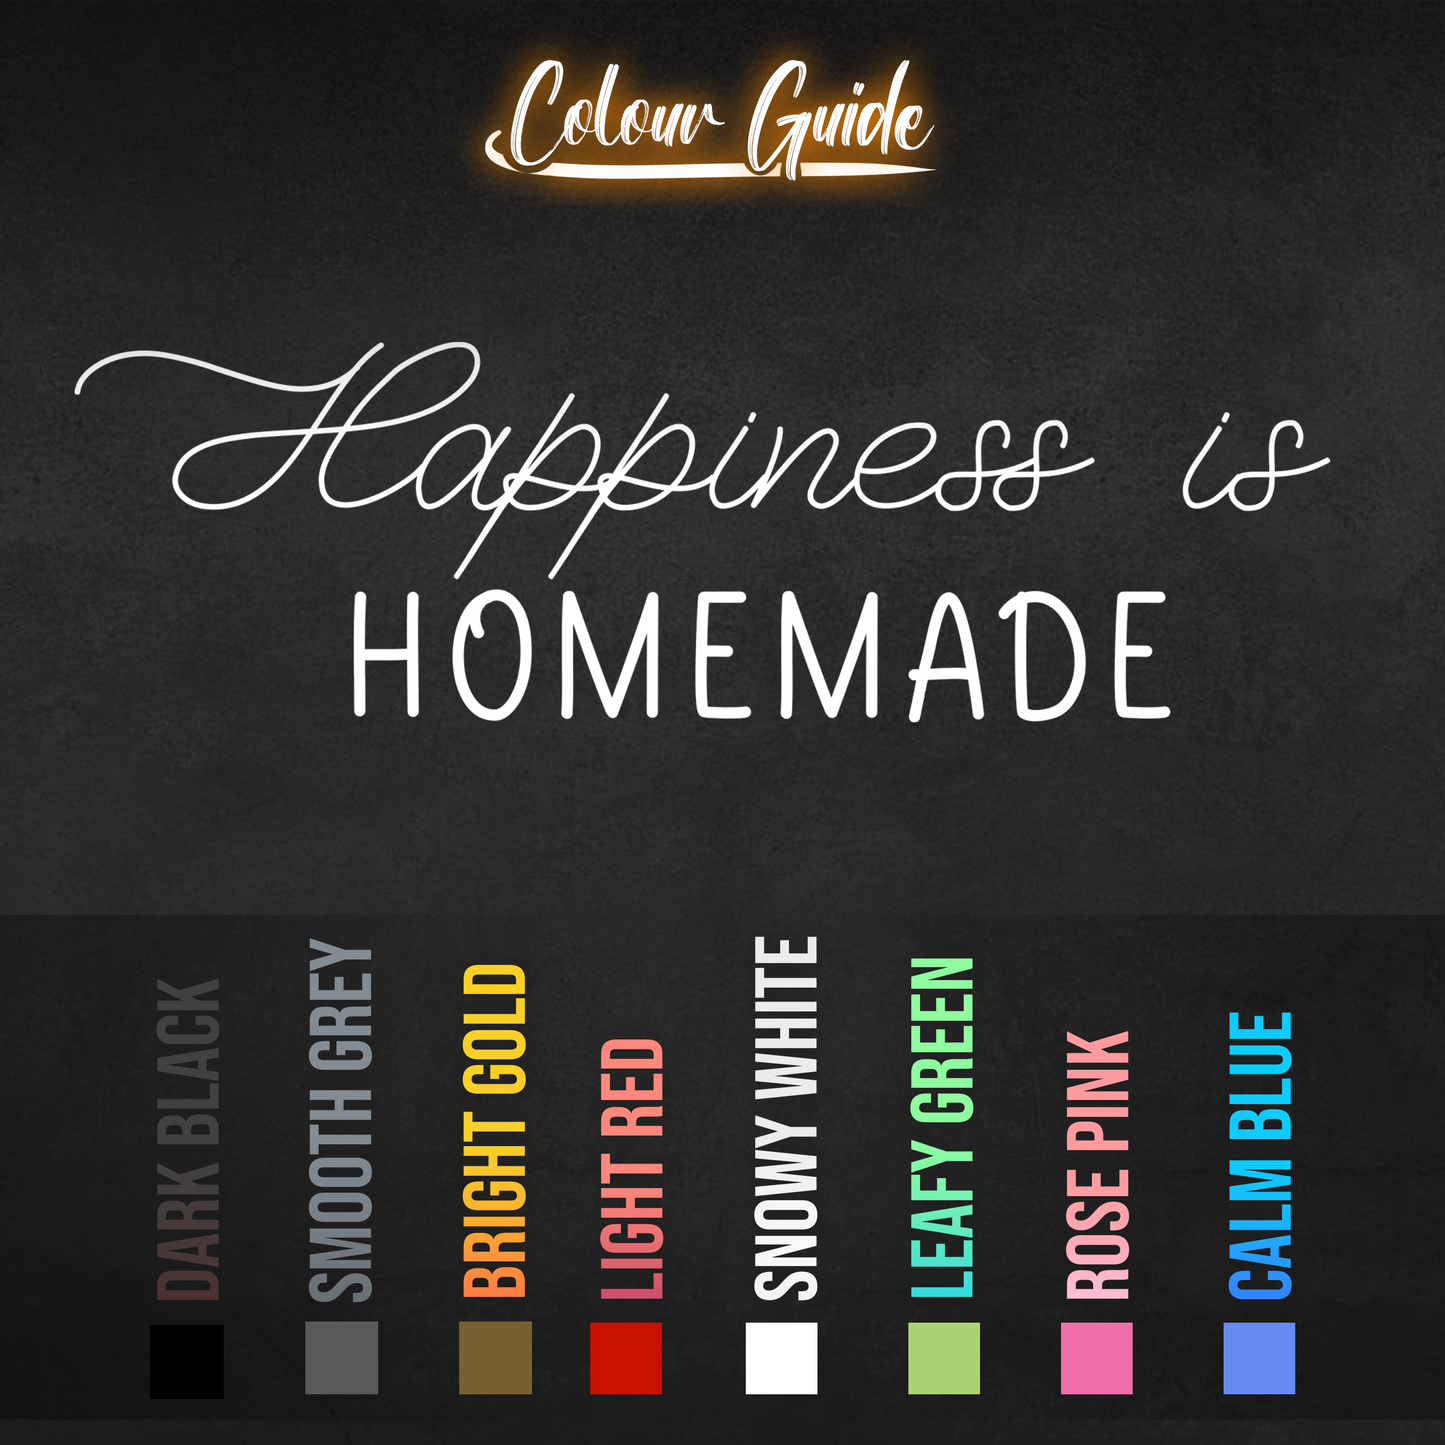 Homemade Happiness Wall Sticker Decal